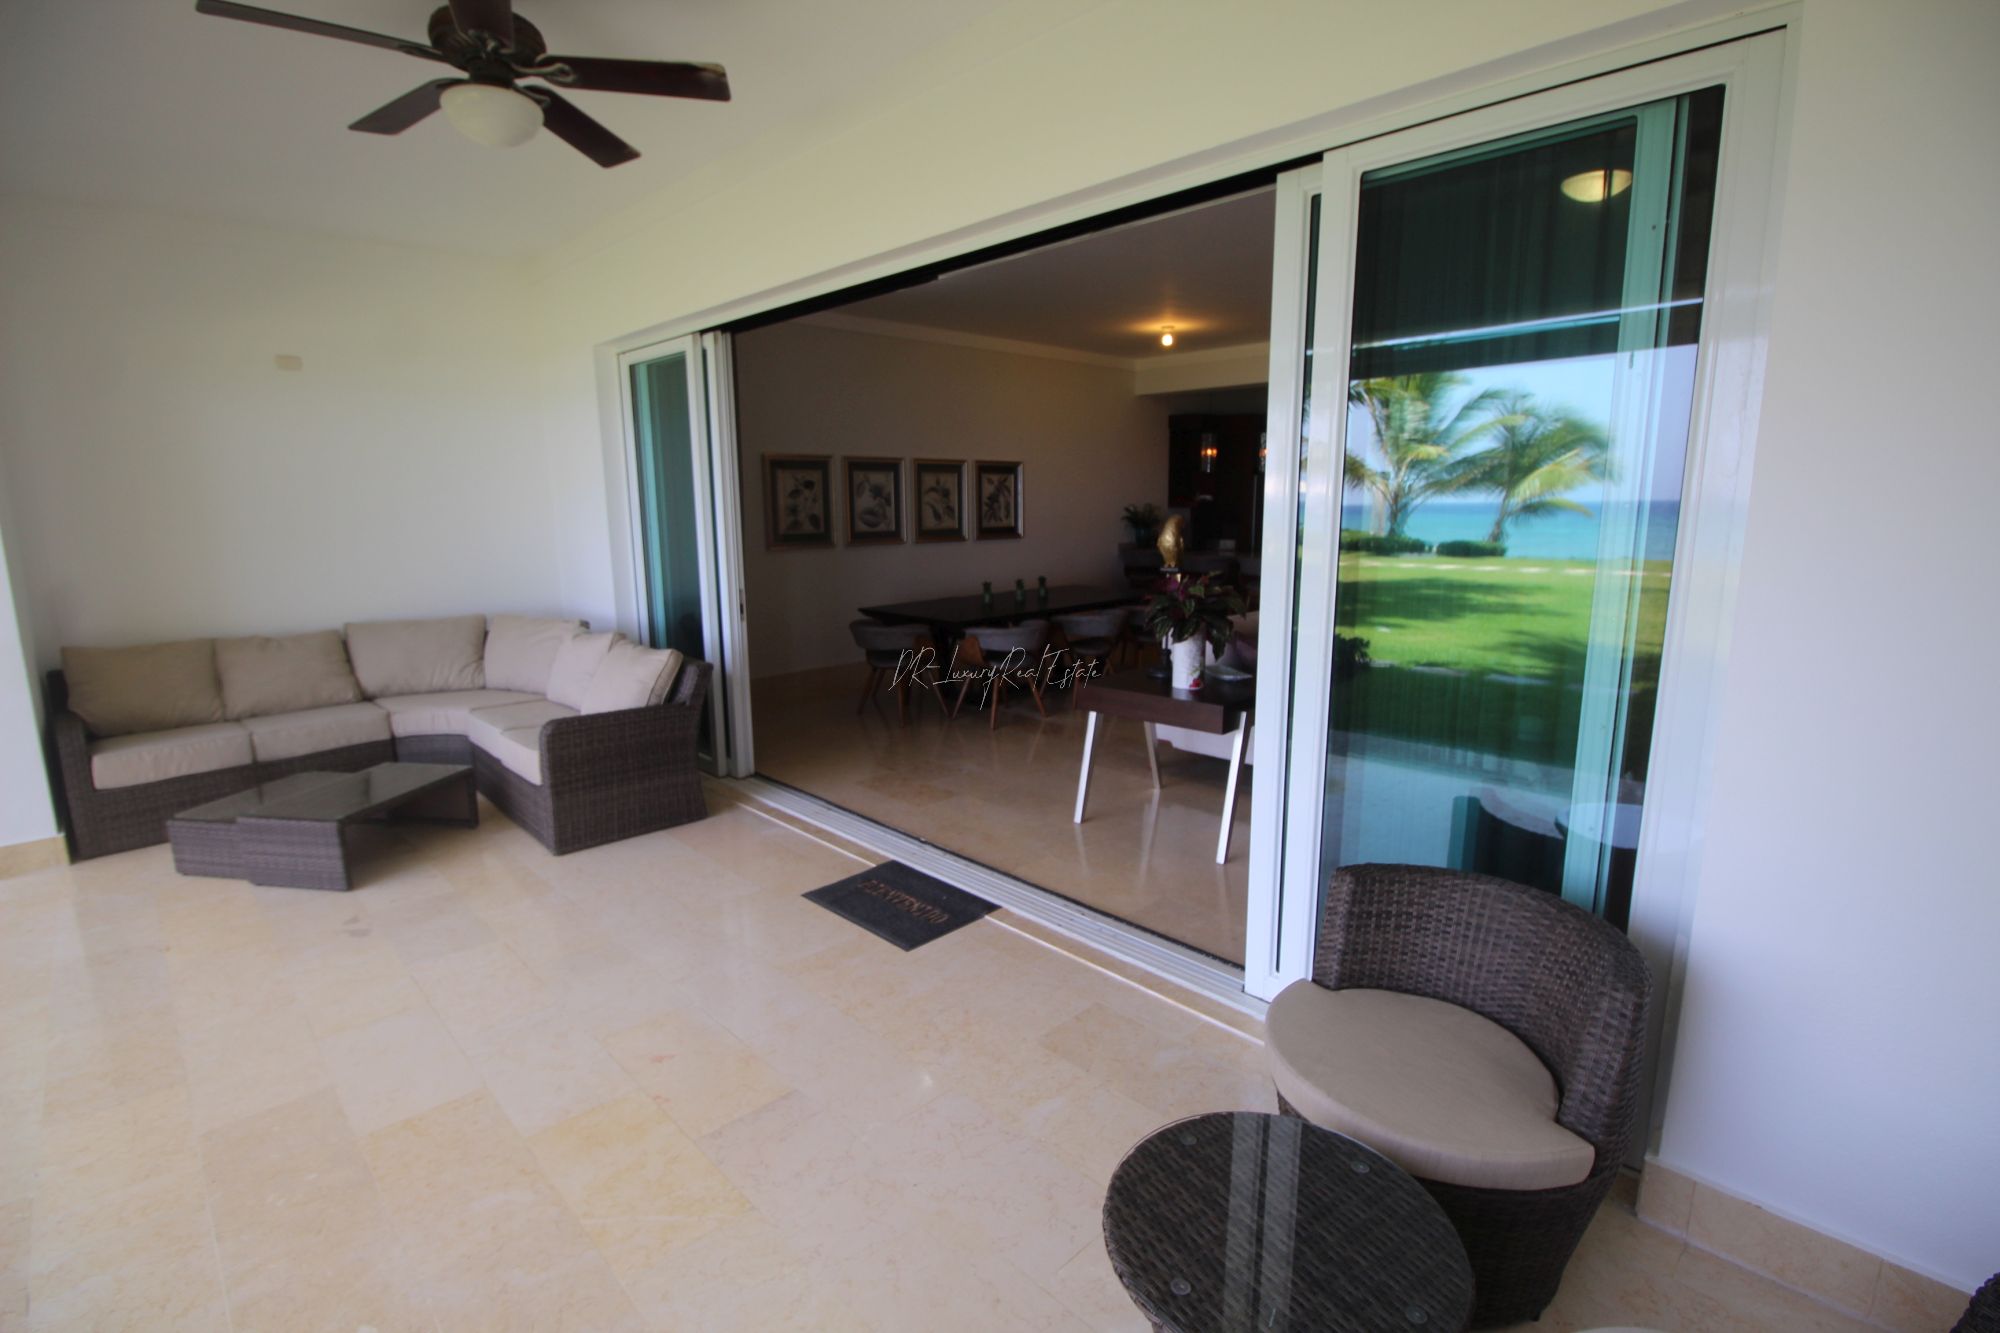 #15 Beautiful modern beachfront condo with 3 bedrooms